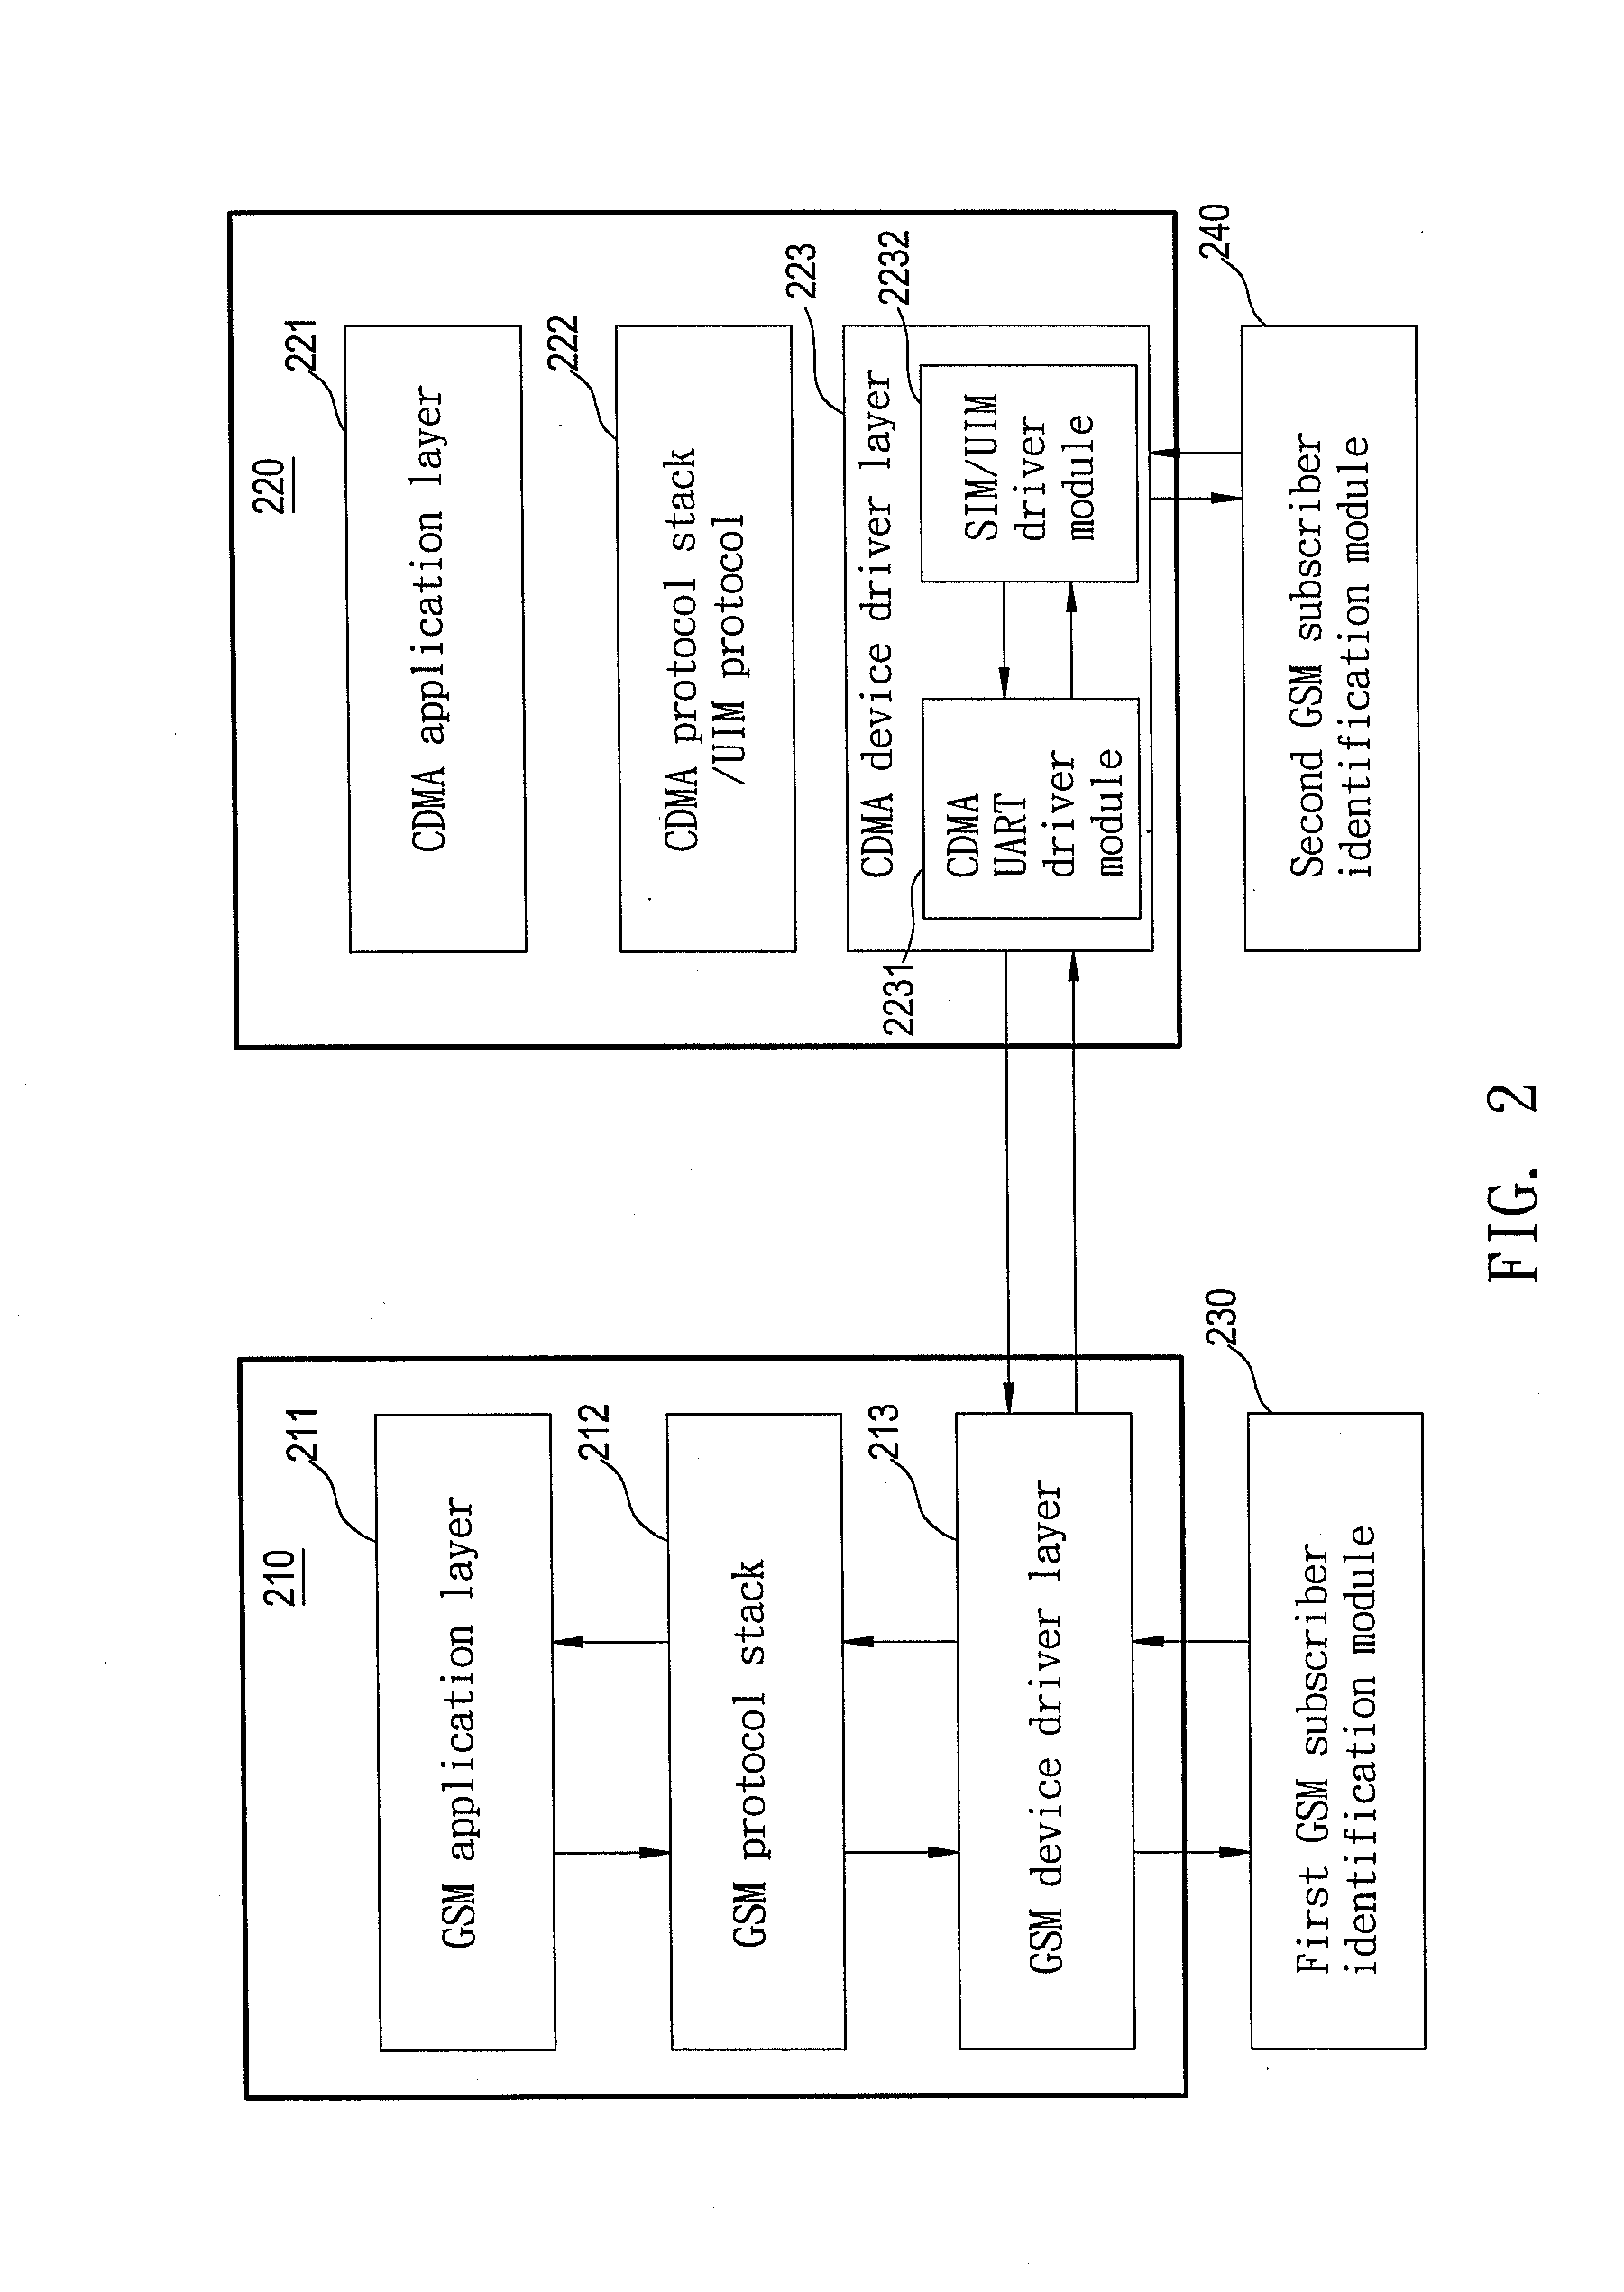 Method for GSM and CDMA dual-mode mobile phone to control two GSM subscriber identification modules